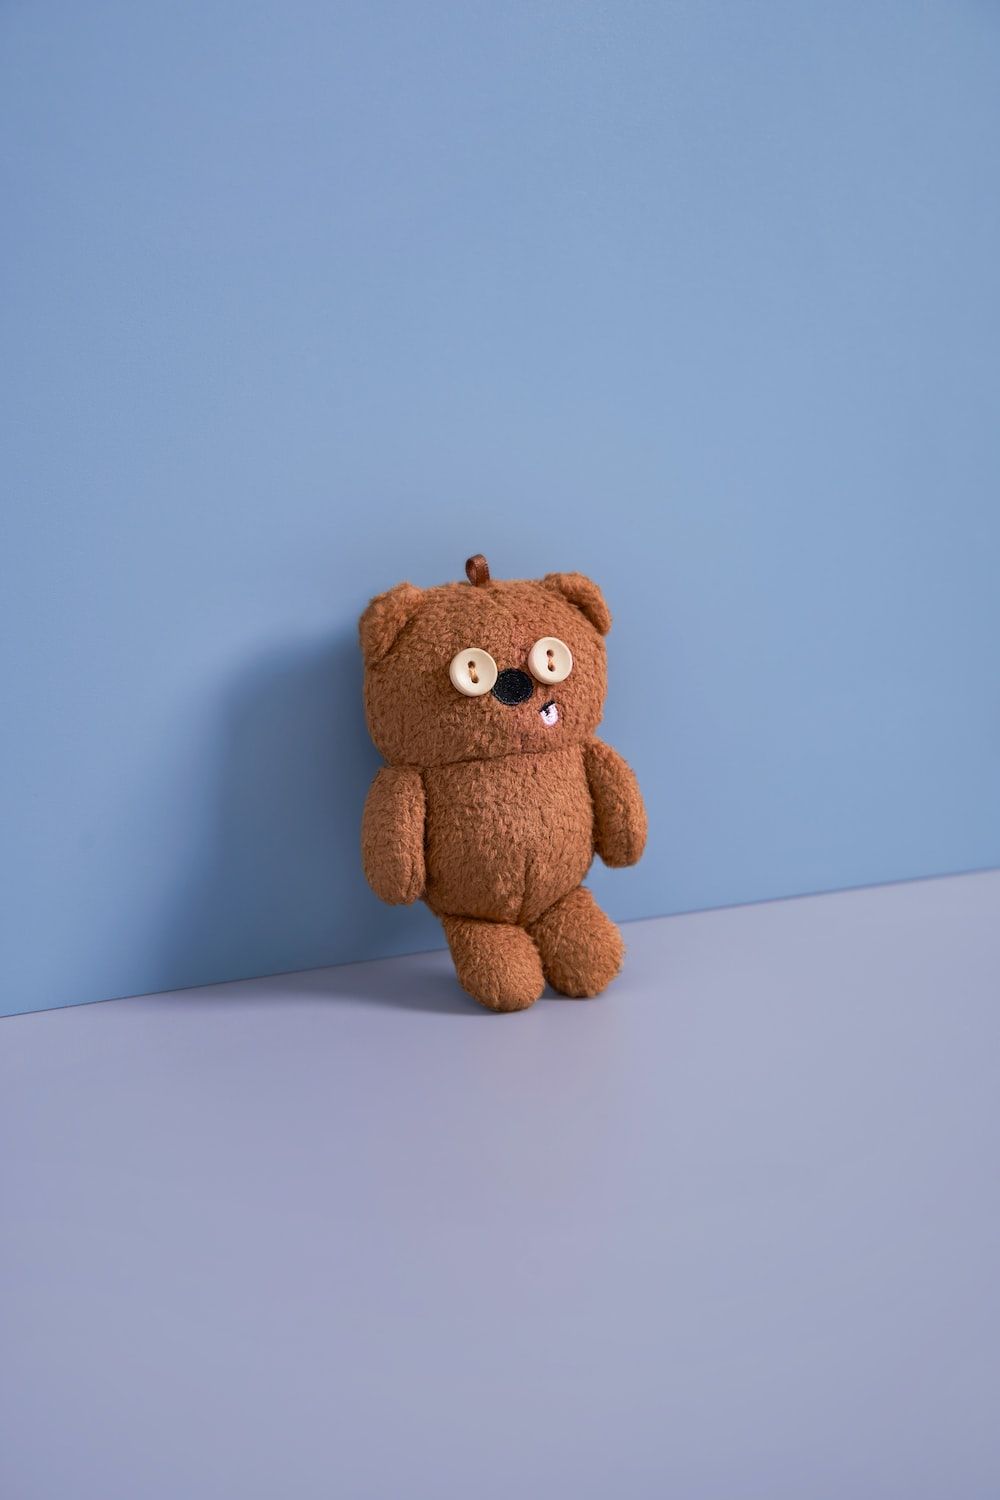 A brown teddy bear with a white button nose and big, round white eyes. - Teddy bear